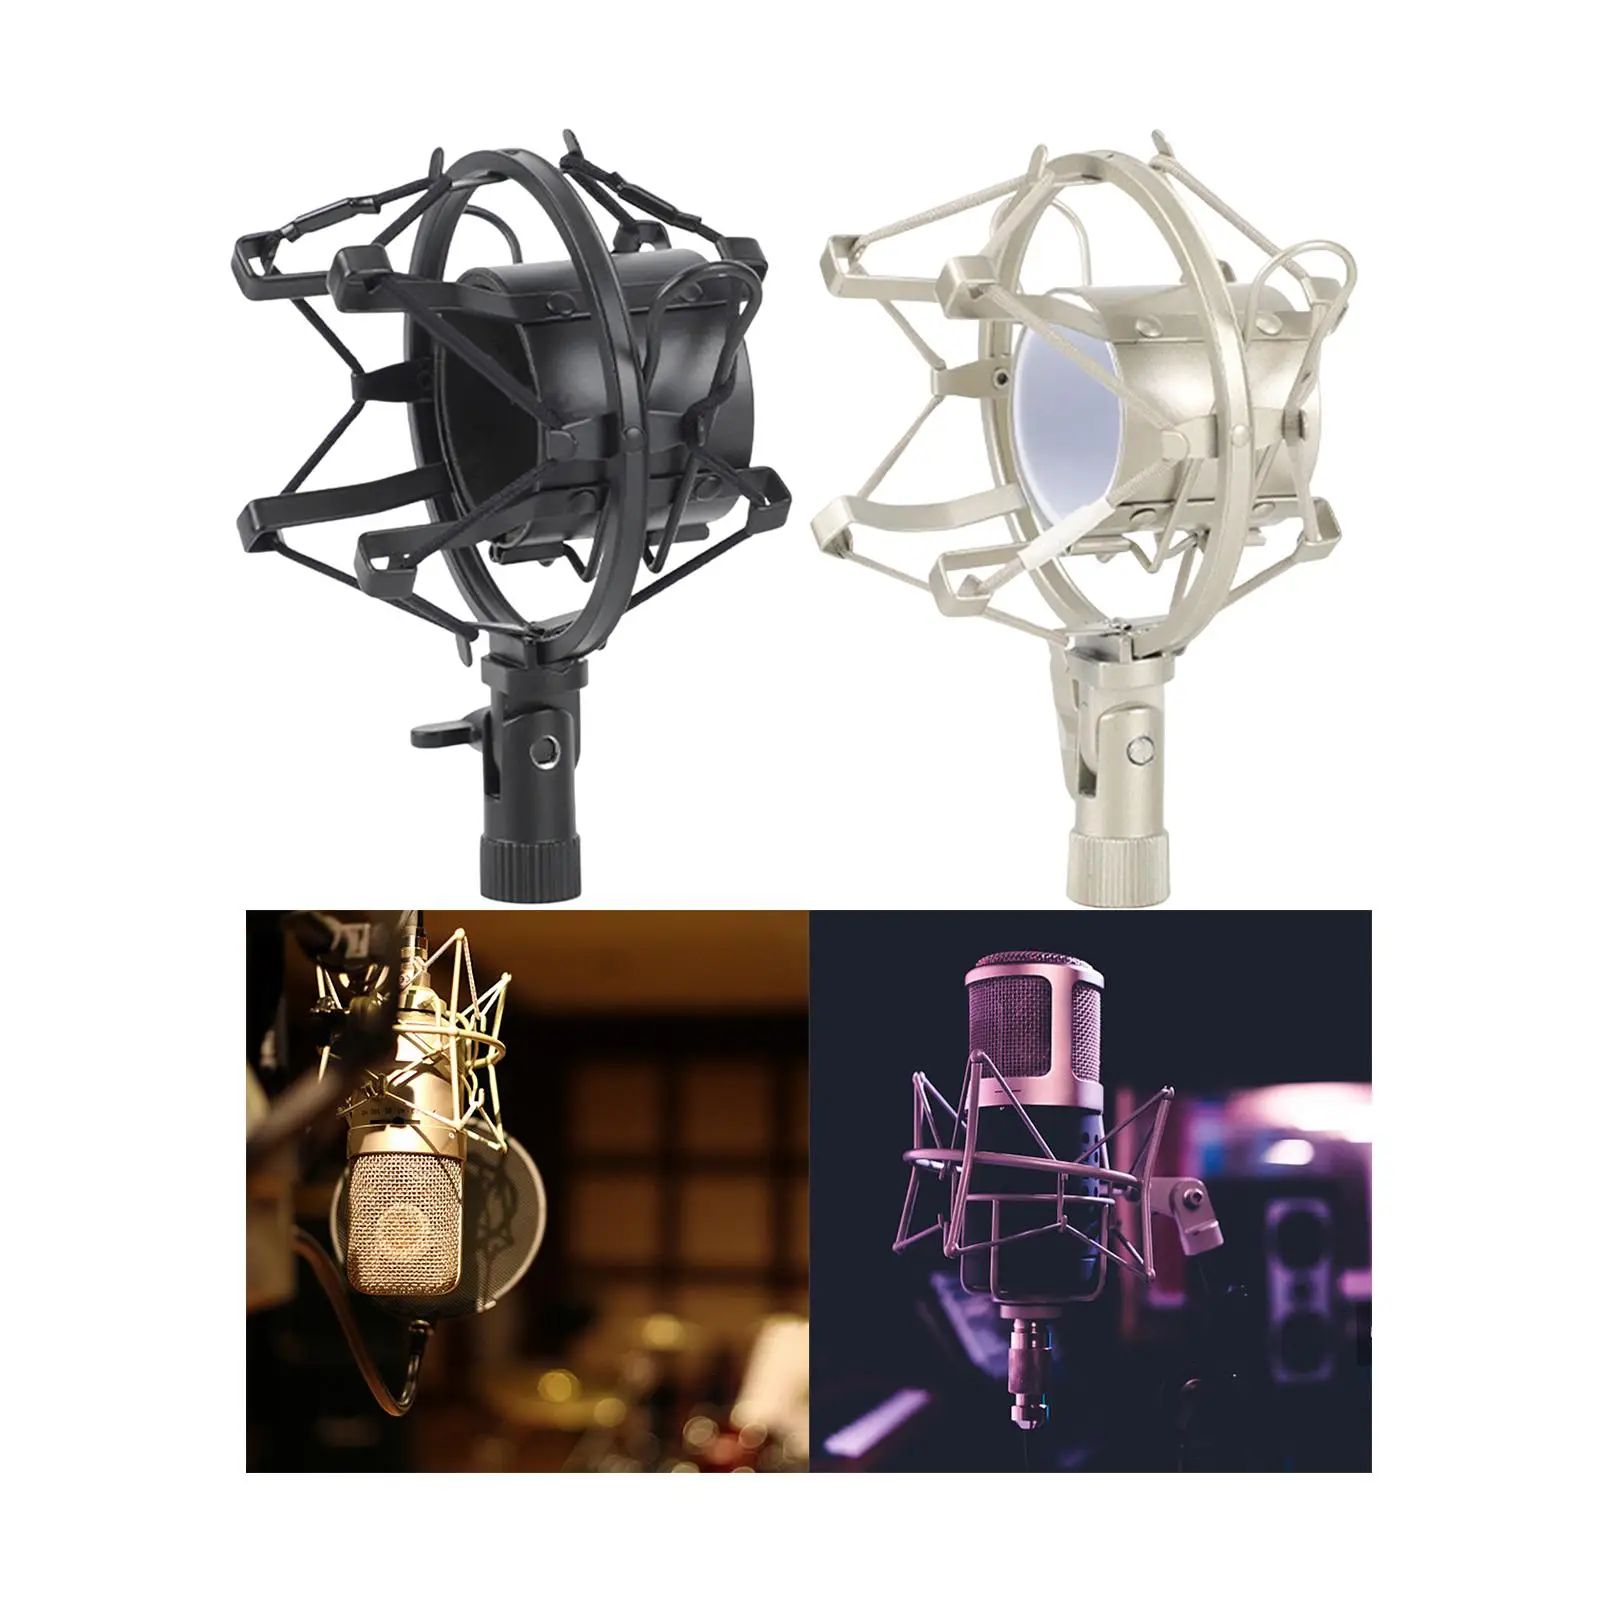 Portable Condenser Microphone Shock Mount Mic Holder Anti Vibration Lightweight for Recording Broadcasting Chat Room